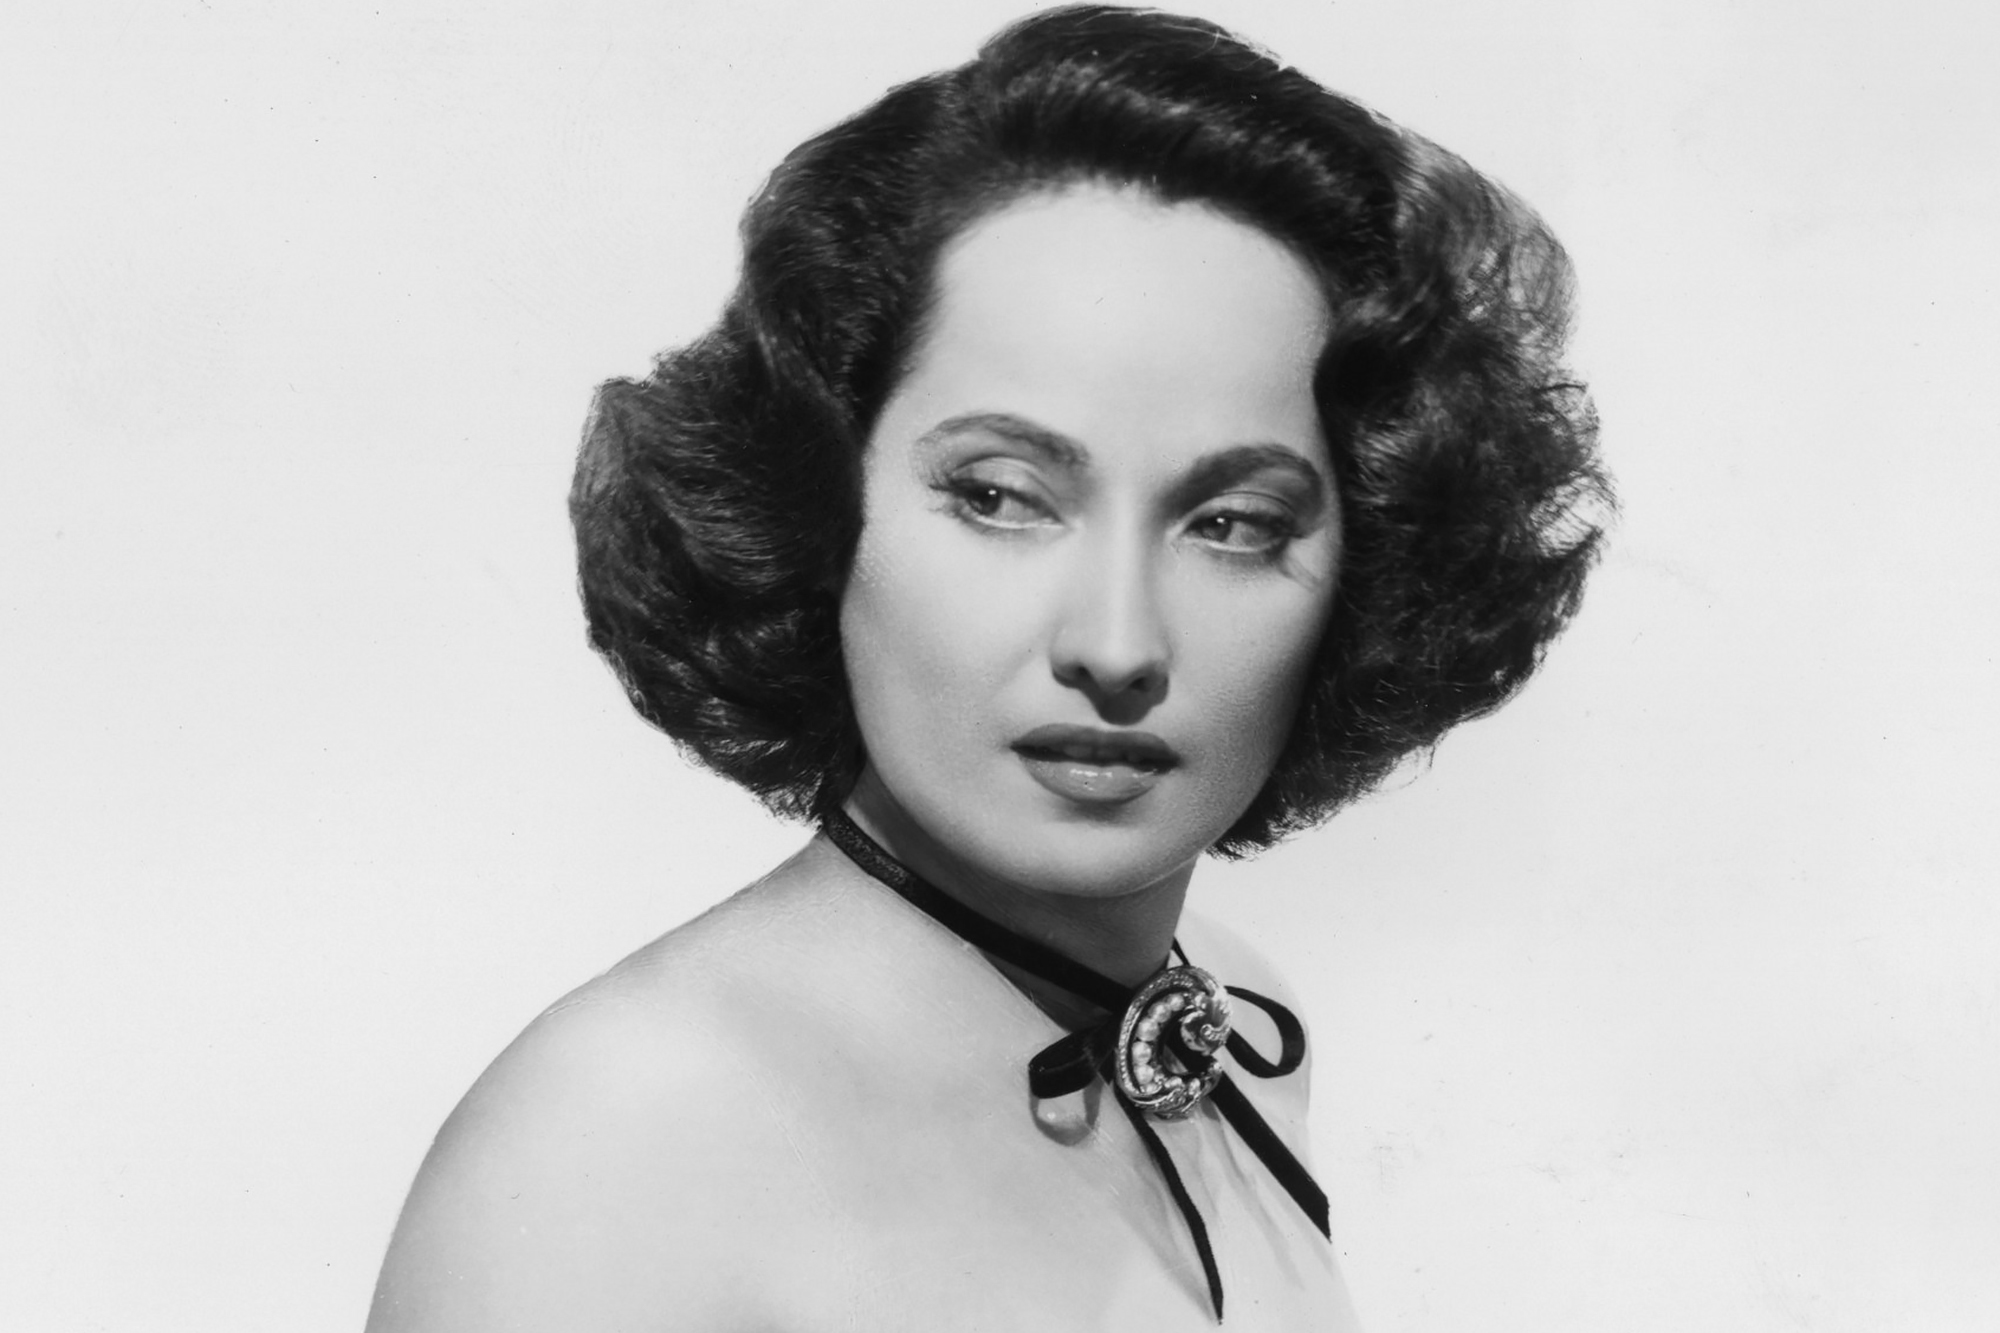 1943: Leading lady Merle Oberon (1911 - 1979) as she appears in the film 'First Comes Courage', a war drama directed by Dorothy Arzner. (Photo by Hulton Archive/Getty Images)